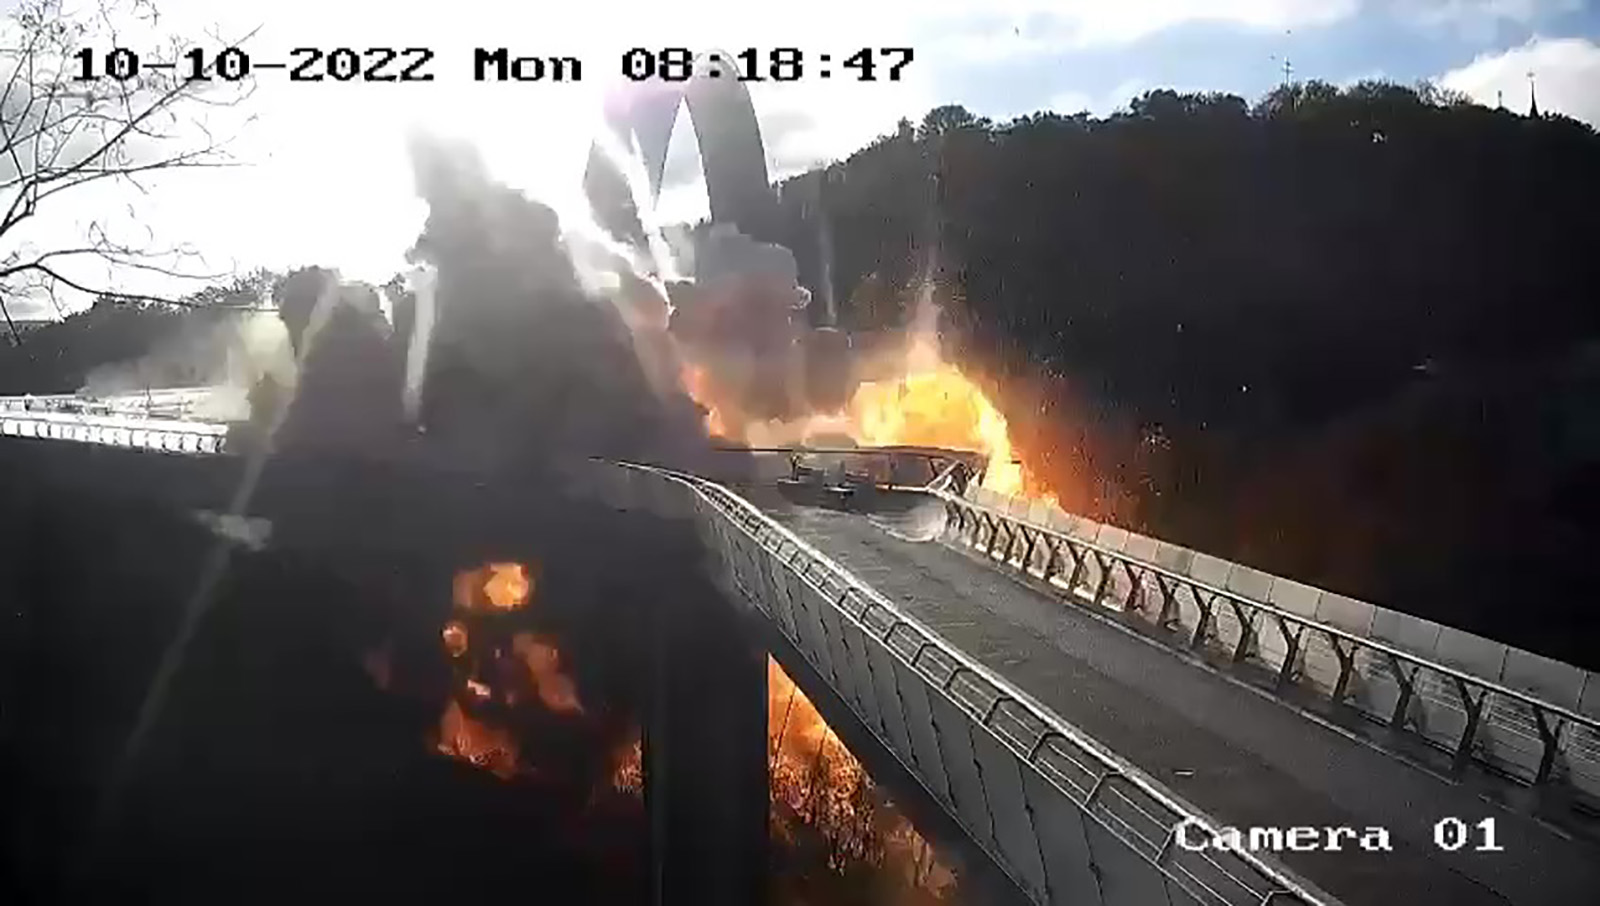 A screen grab taken from a surveillance camera shows an explosion on a bridge in the Shevchenkivskyi district of the Ukrainian capital, Kyiv, on October 10.